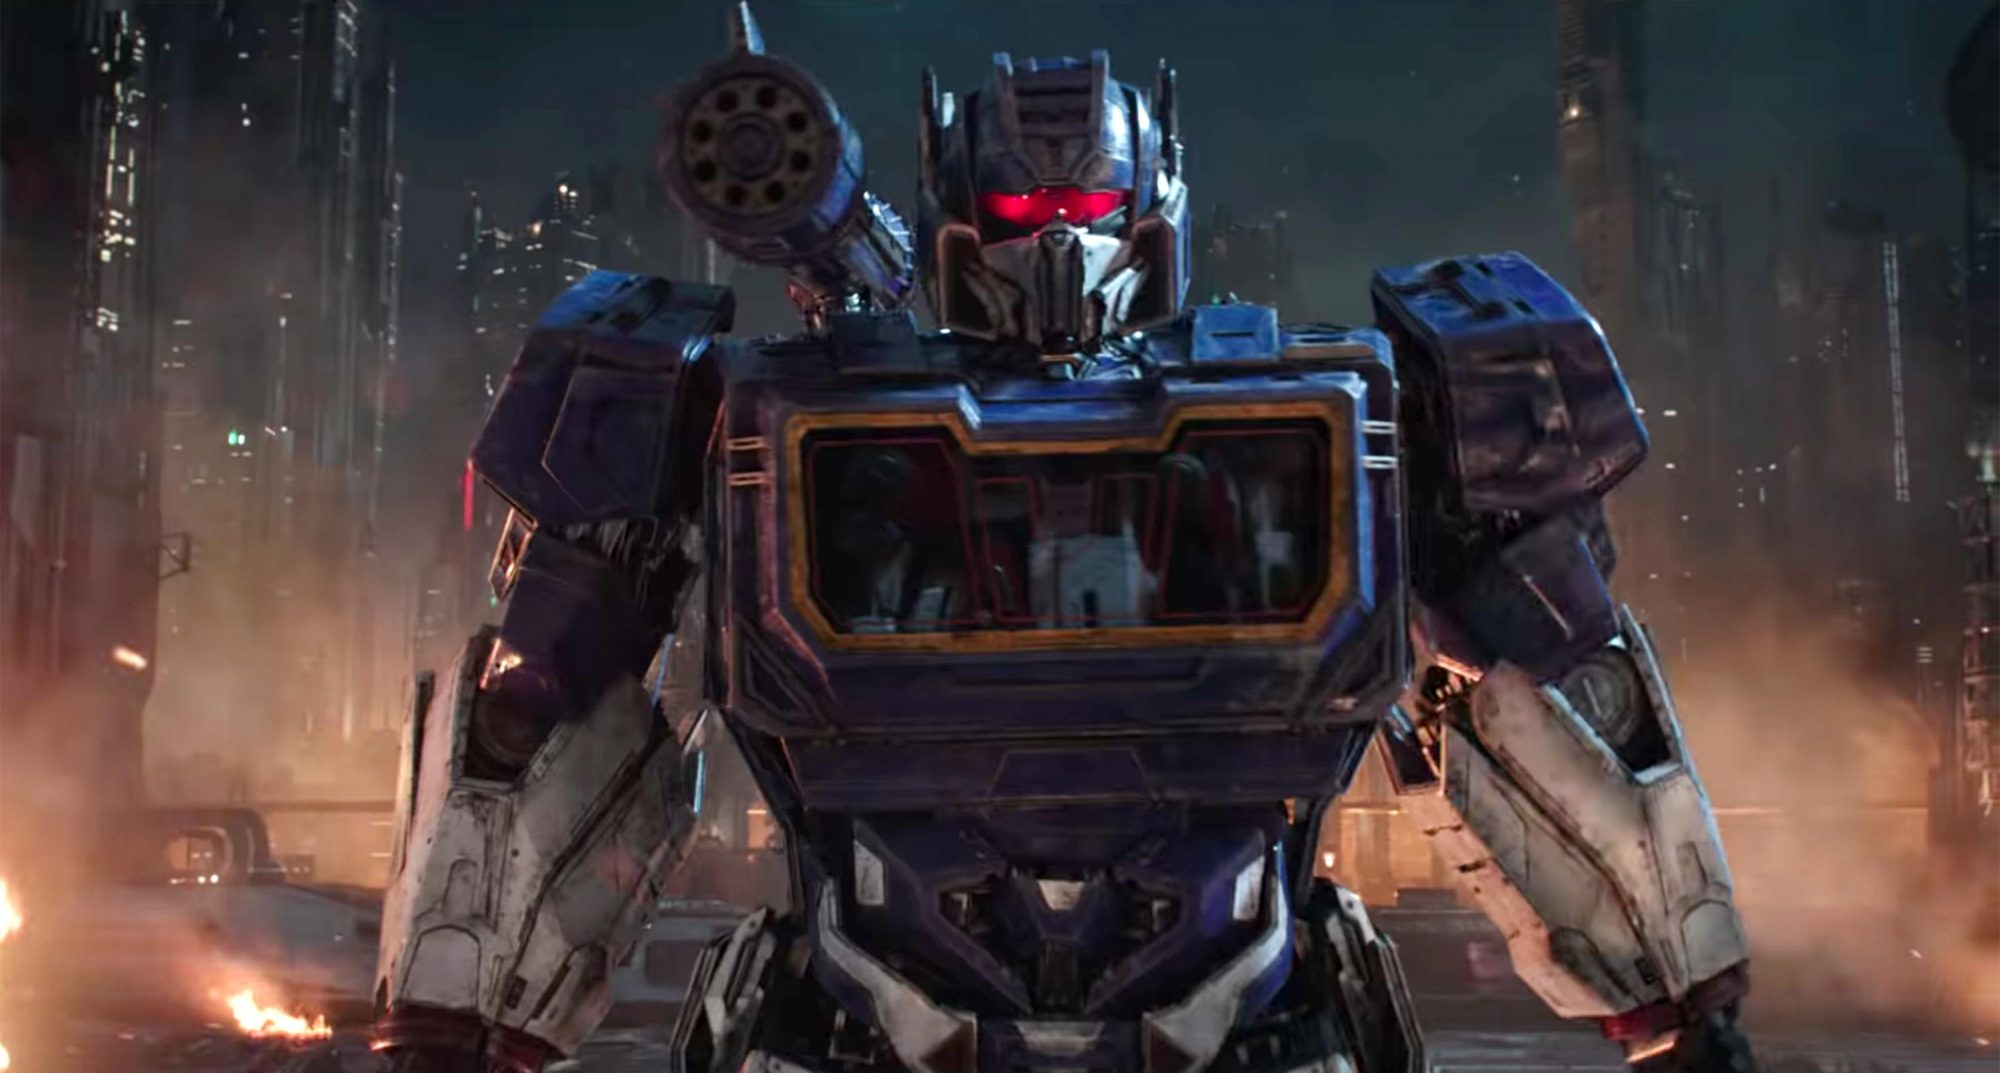 Bumblebee trailer: Here are all the 1980s Transformers throwbacks